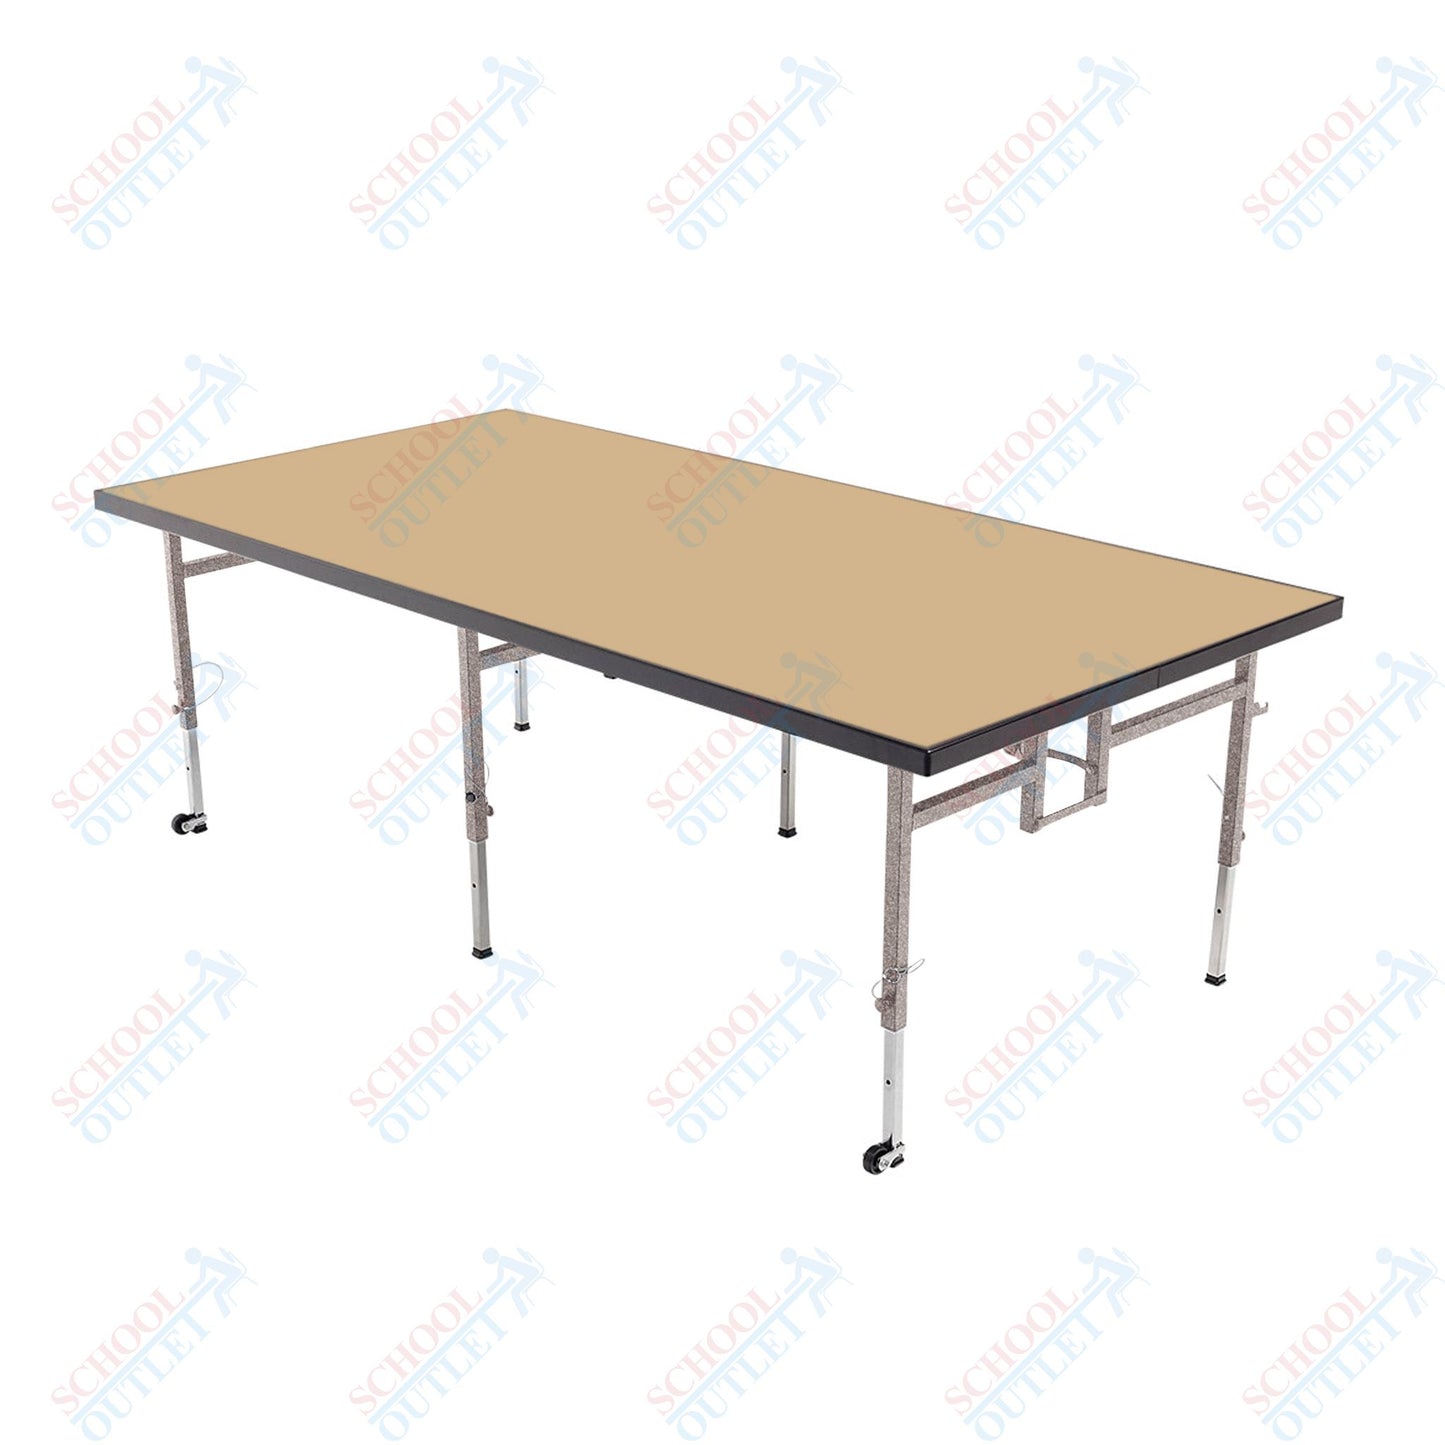 AmTab Adjustable Height Stage - Carpet Top - 36"W x 48"L x Adjustable 16" to 24"H (AmTab AMT-STA3416C) - SchoolOutlet